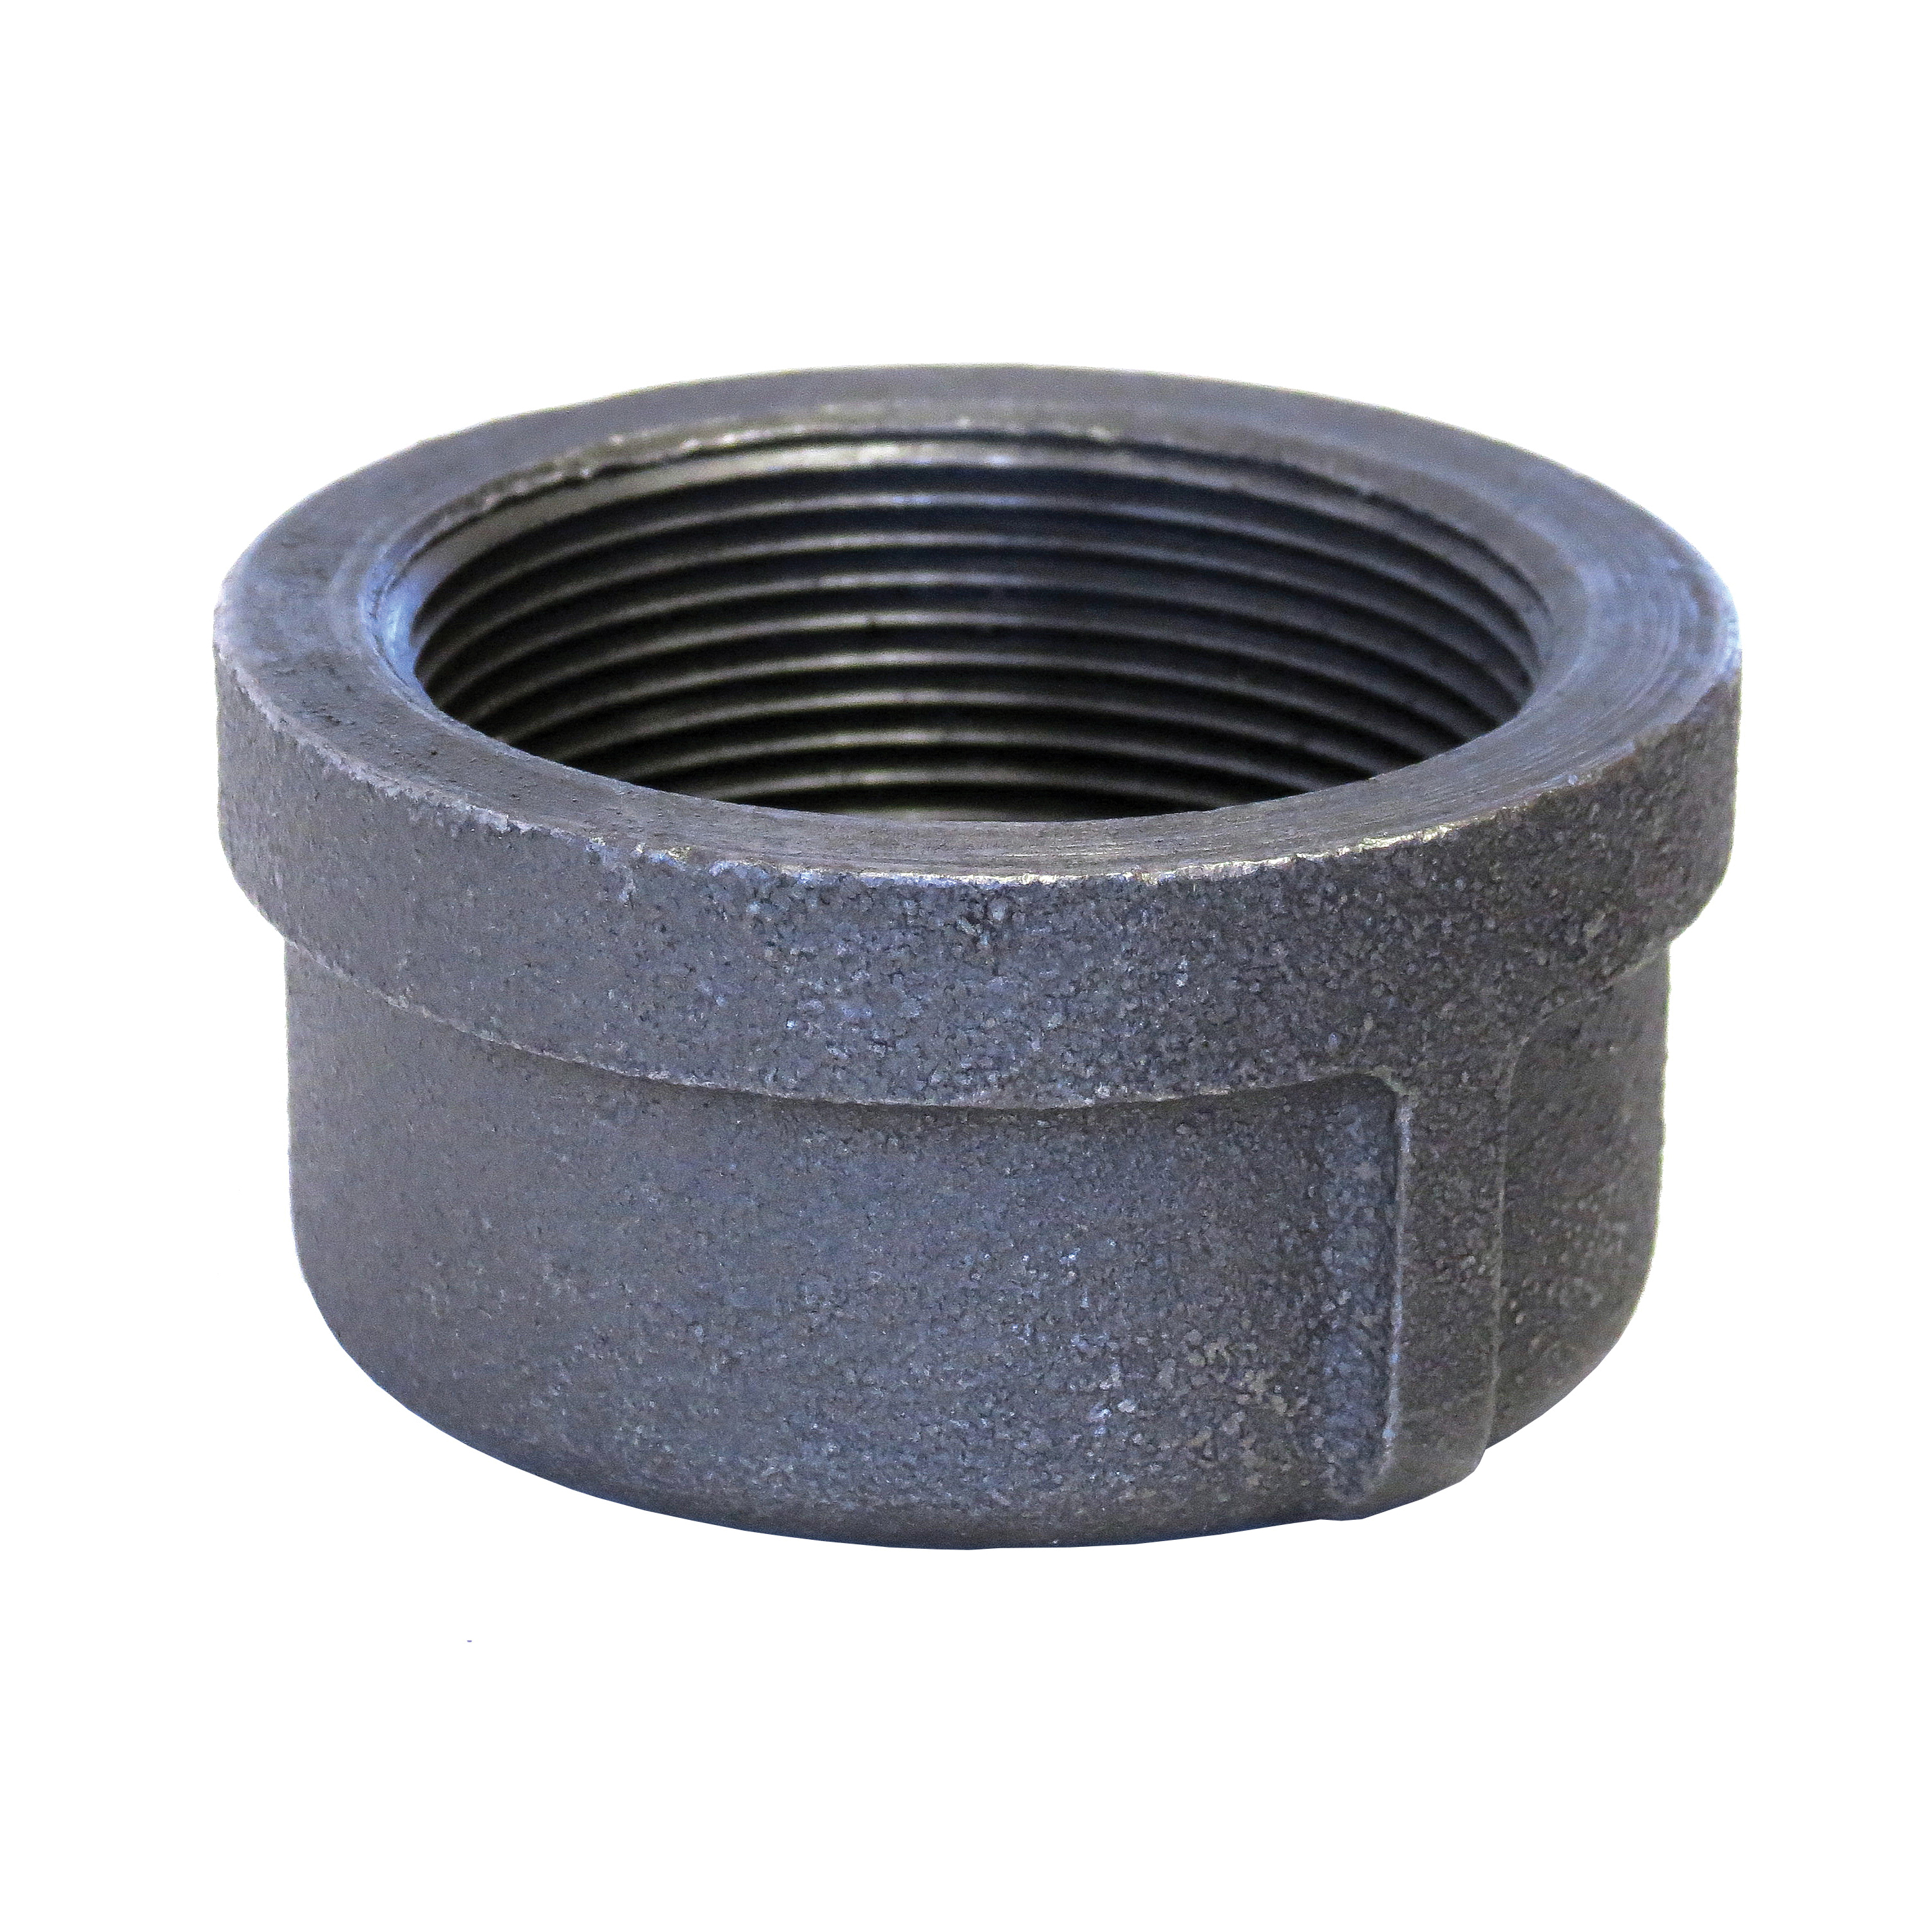 Anvil® 0319900643 FIG 1124 Standard Pipe Cap, 1-1/4 in Nominal, FNPT End Style, 150 lb, Malleable Iron, Galvanized, Domestic